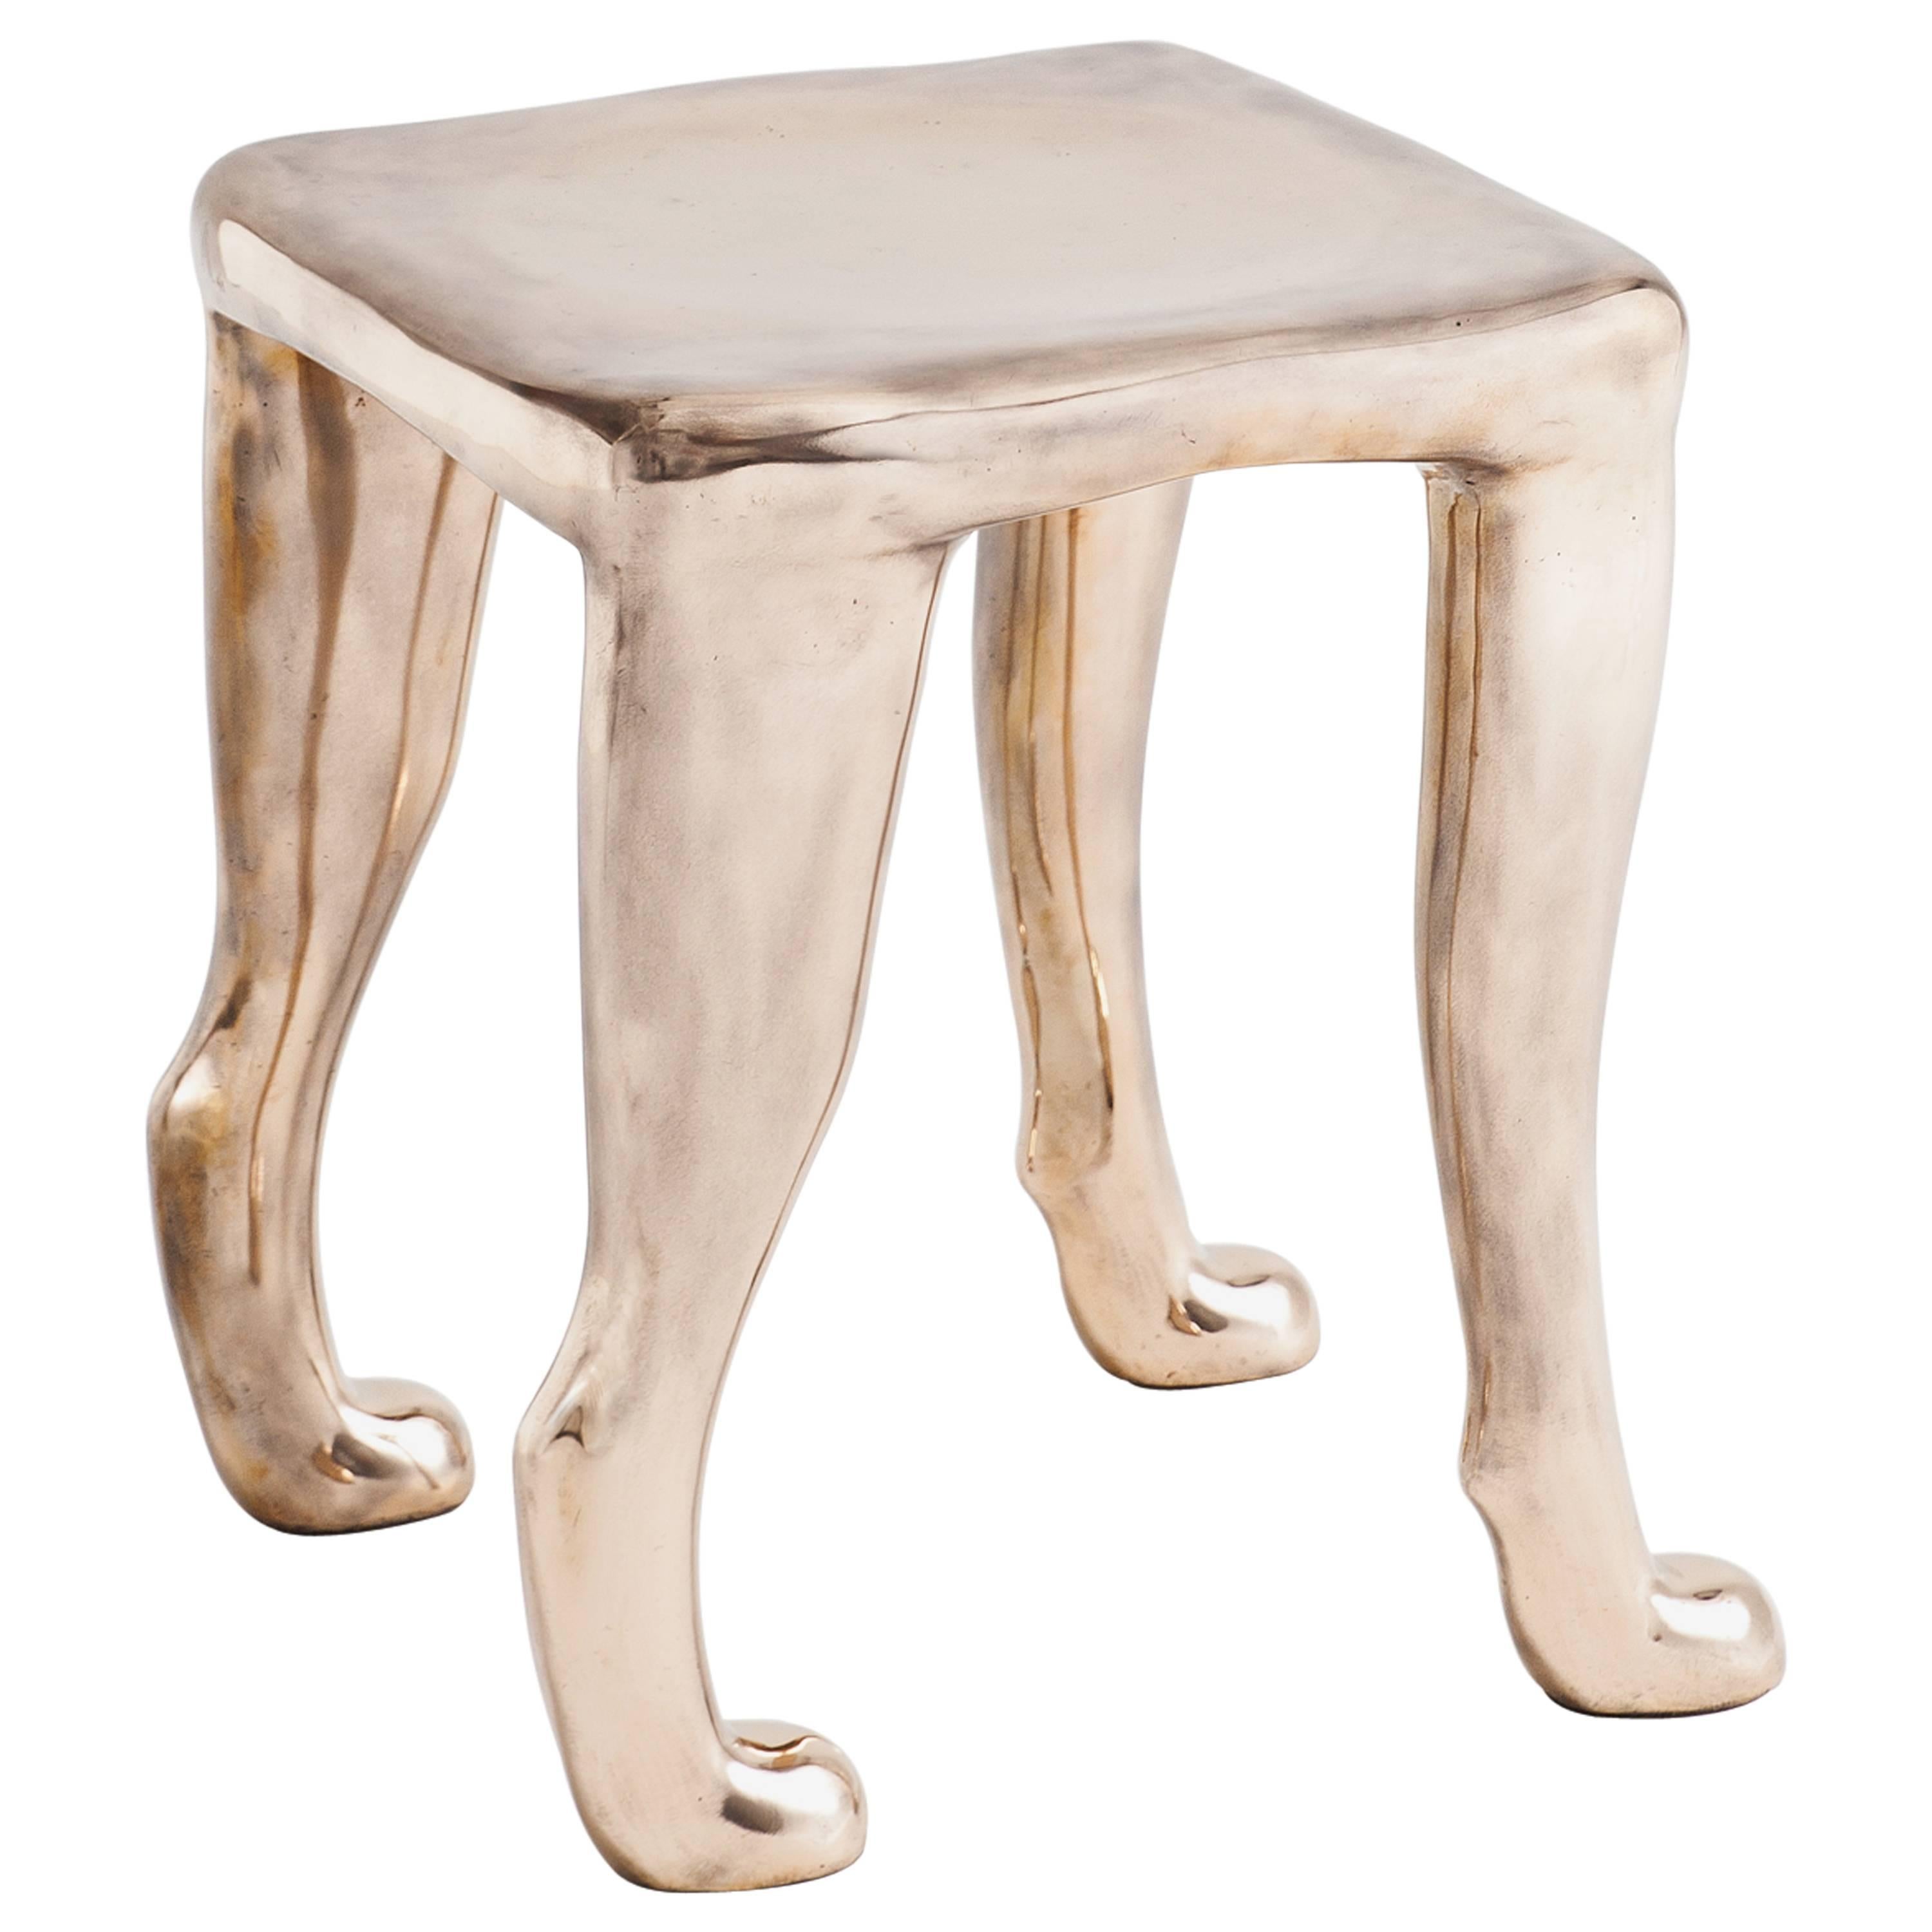 Khamon is a cast bronze stool built as a sculpture. The inspiration for Khamon comes from the willingness to dignify the stool as a piece of furniture often forgotten.
It has a polished finish made by an artisan.

Limited edition of eight